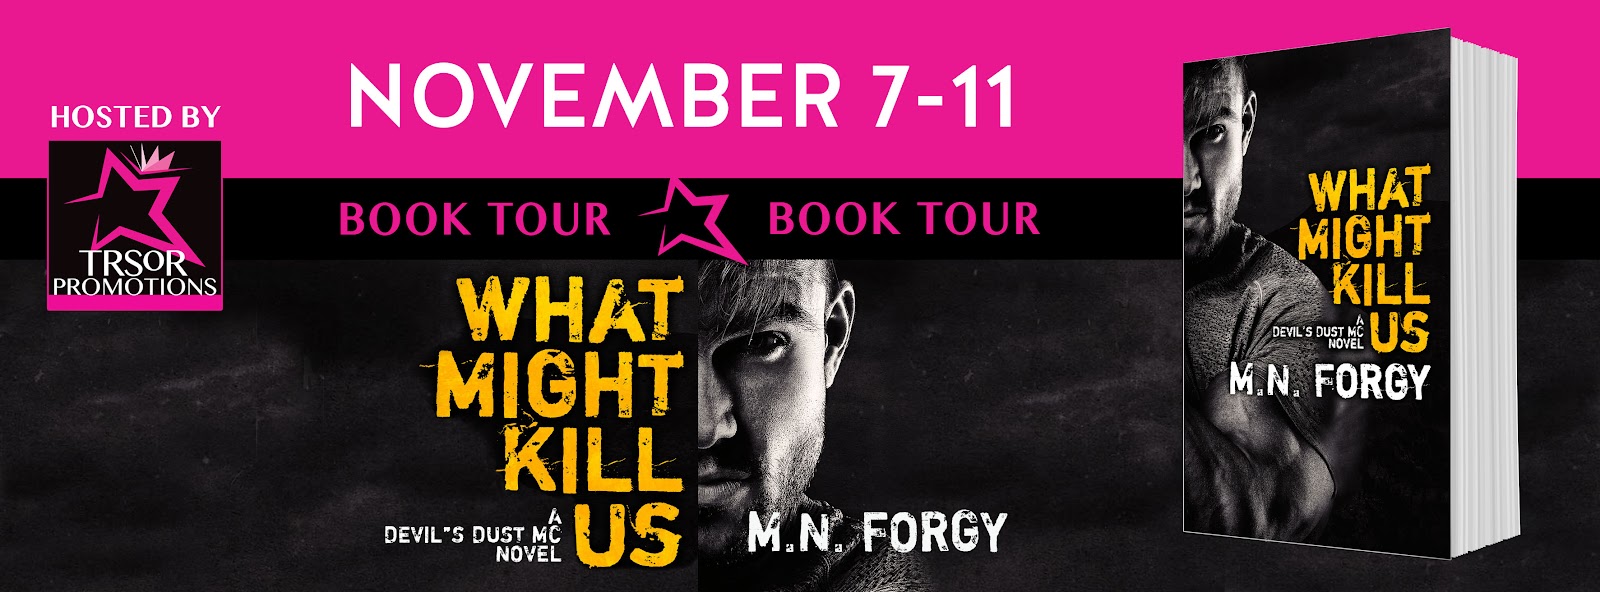 WHAT_MIGHT_KILL_US_BOOK_TOUR.jpg